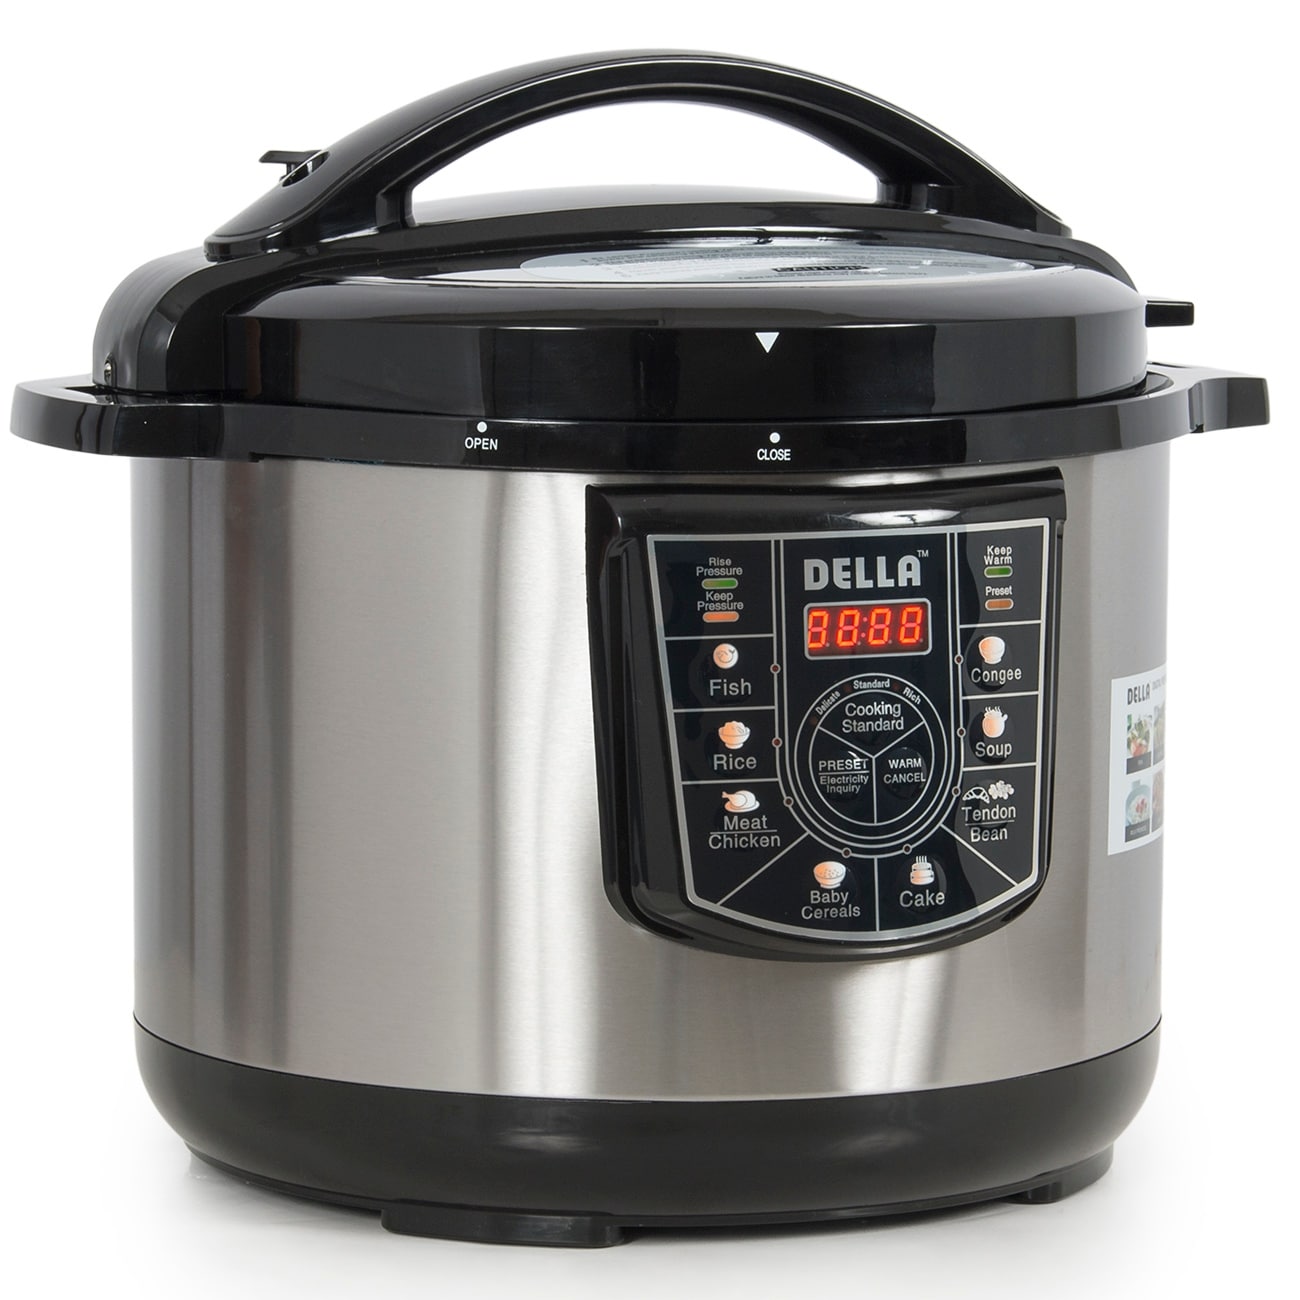 https://ak1.ostkcdn.com/images/products/is/images/direct/d536fe4d7f49dded6cadd741c84ceba0d3c06679/Della-8-in-1-Programmable-Electric-Pressure-Cooker-Stainless-Steel%2C-10-Quart-1400-Watt.jpg